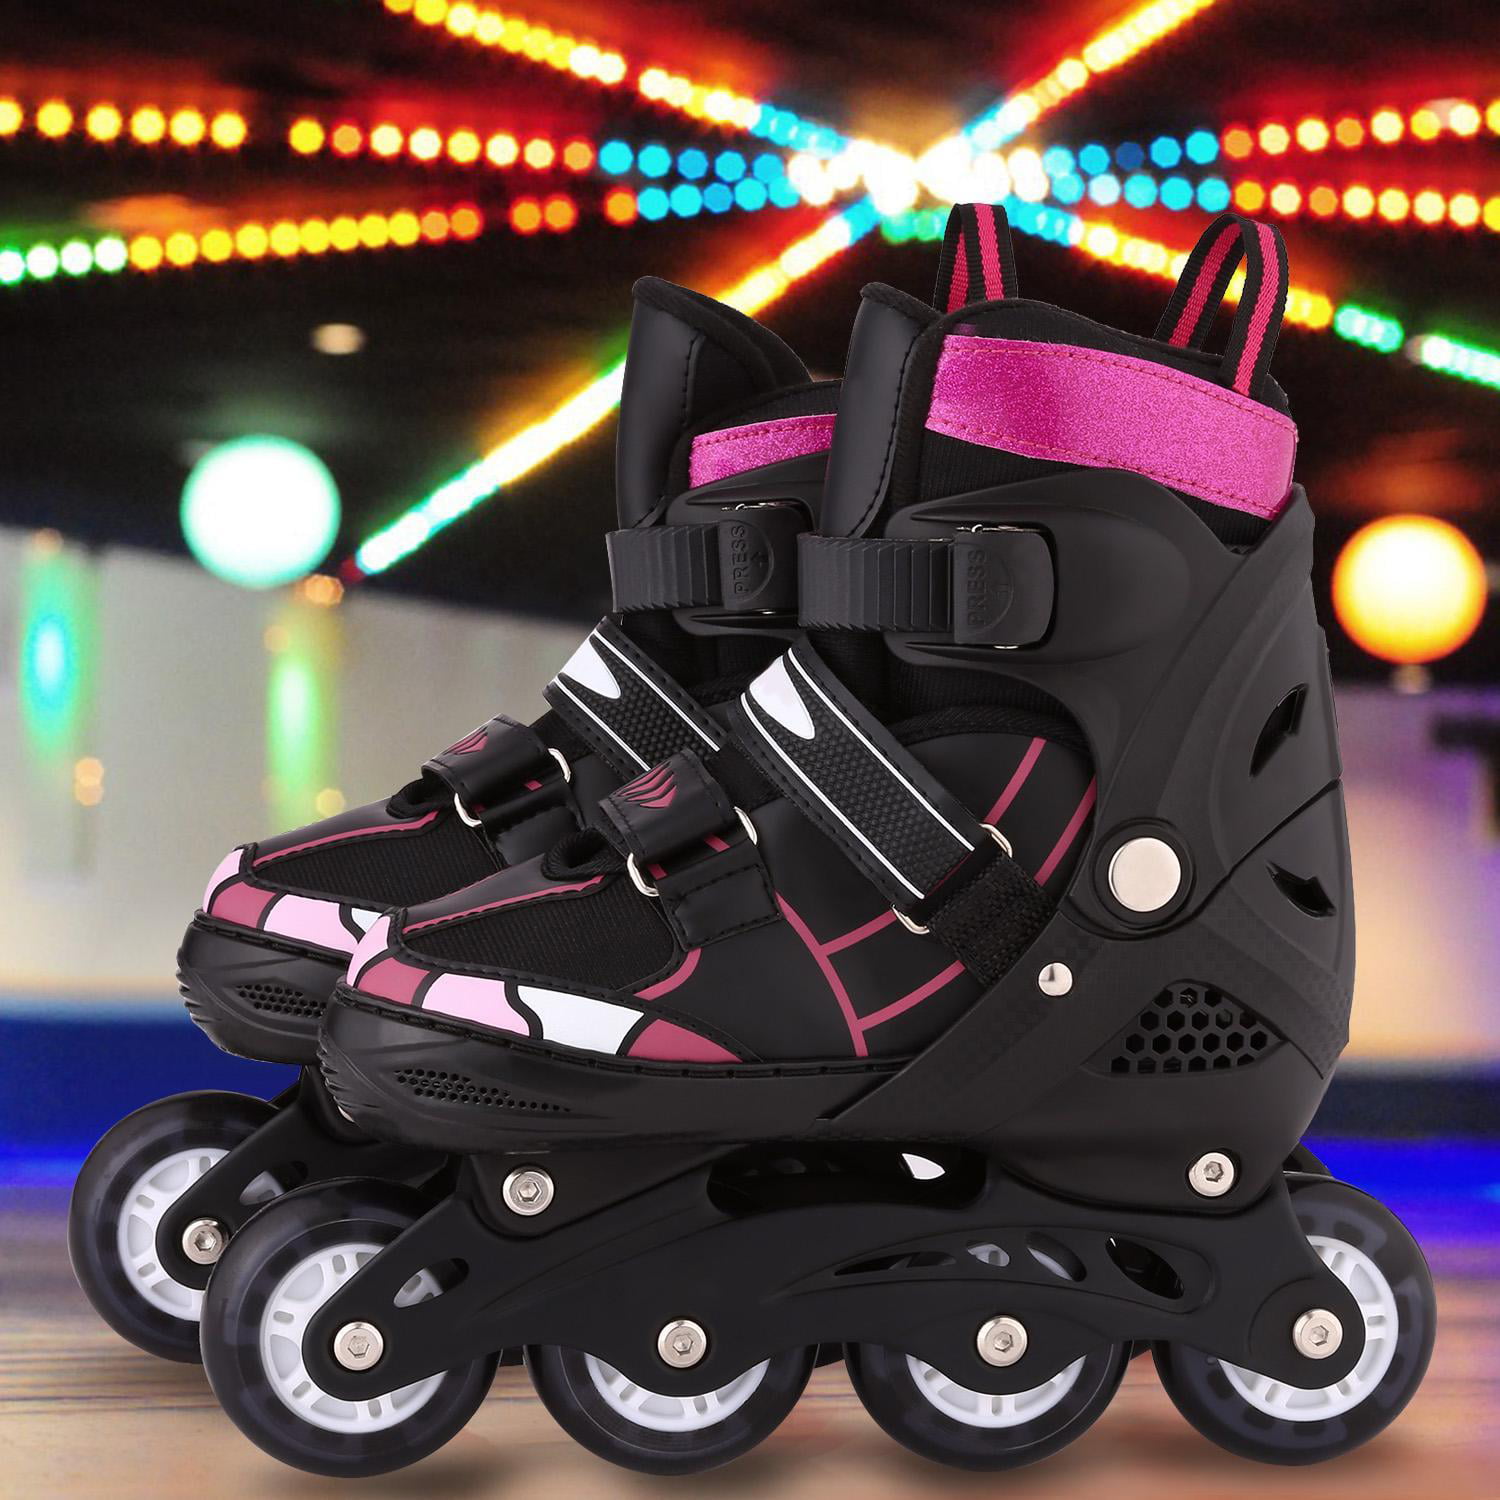 Professional Skates for Adults and Children Skates with Protection included Calma Dragon Adjustable In-Line Skates 4 Wheels